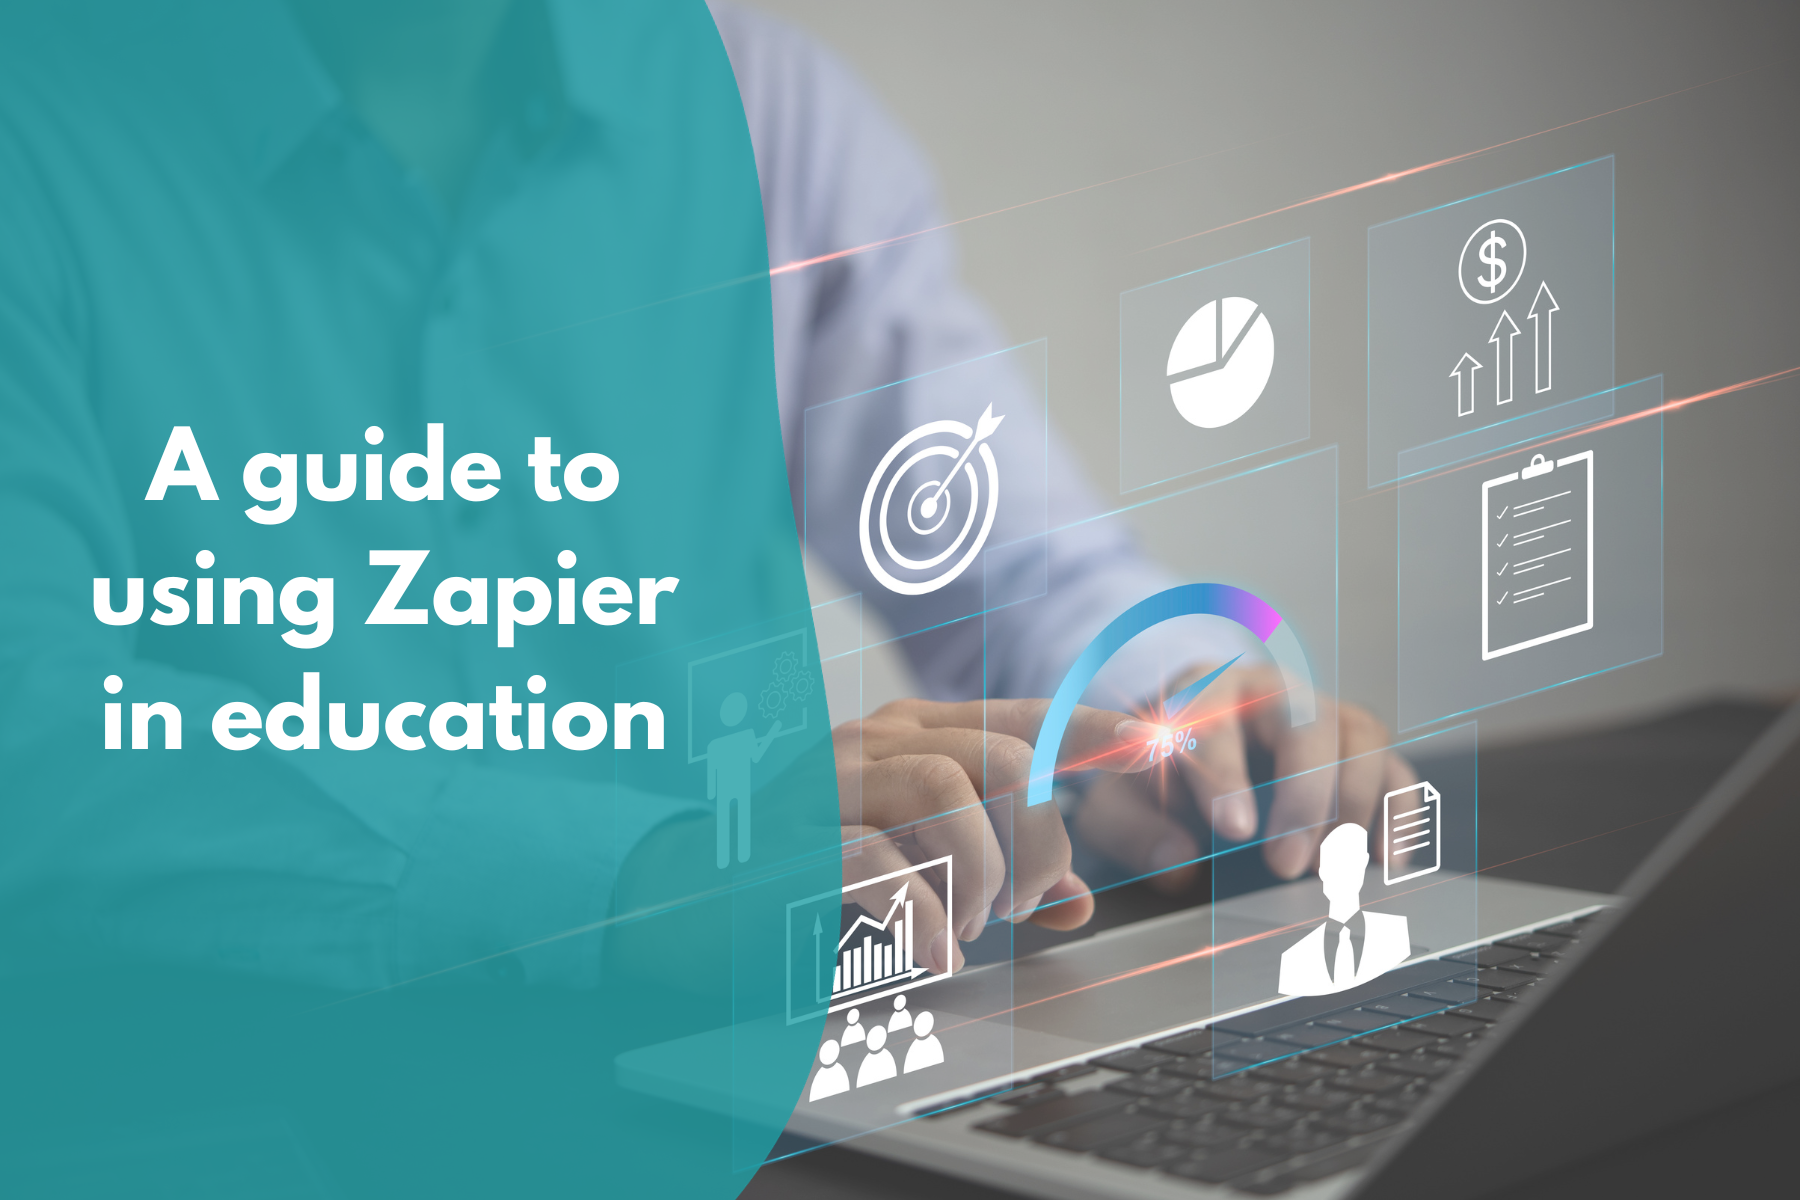 A guide to using Zapier in education